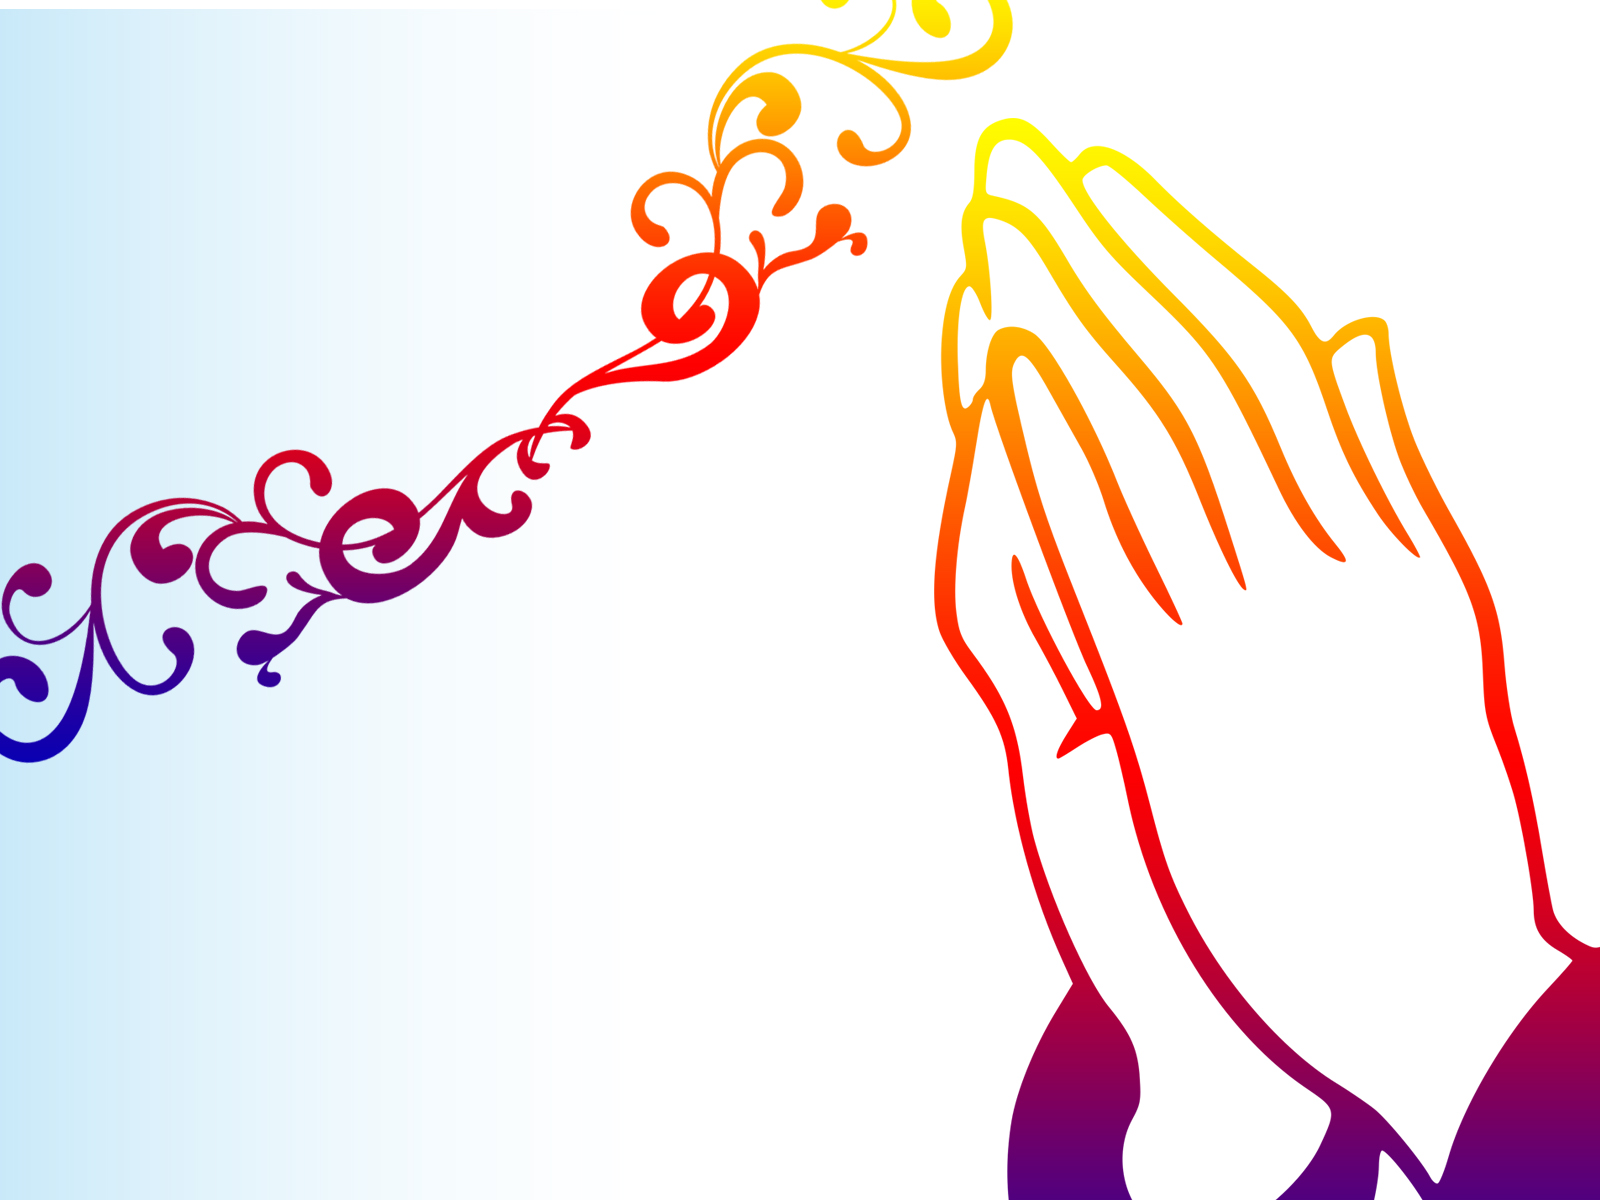 Praying Hands Backgrounds | Orange, Religious Templates | Free PPT Grounds